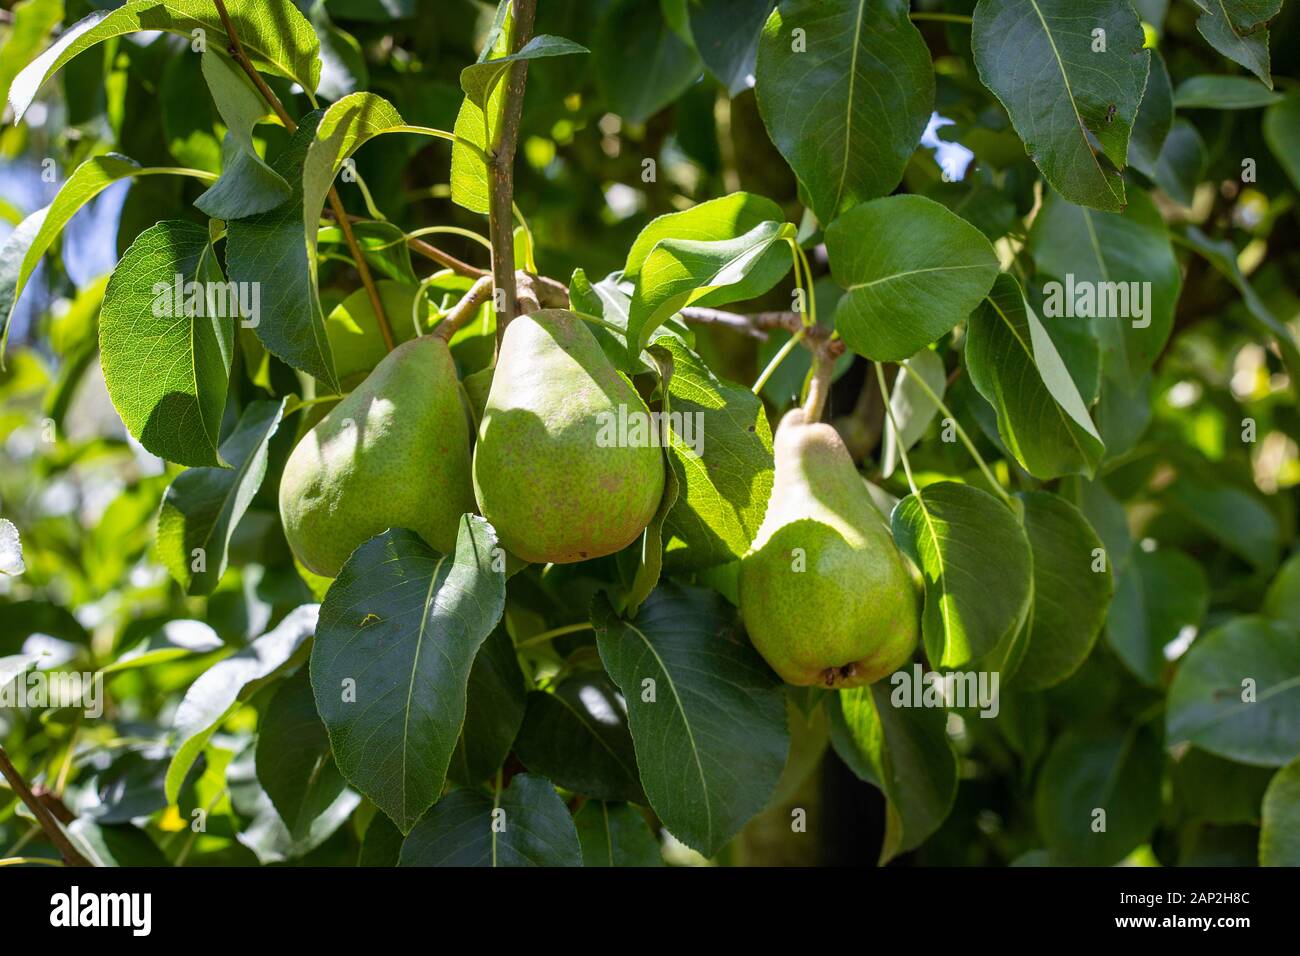 A pear variety, Doyenne du Comice, growing on a healthy fruit tree in summer, Christchurch, New Zealand Stock Photo